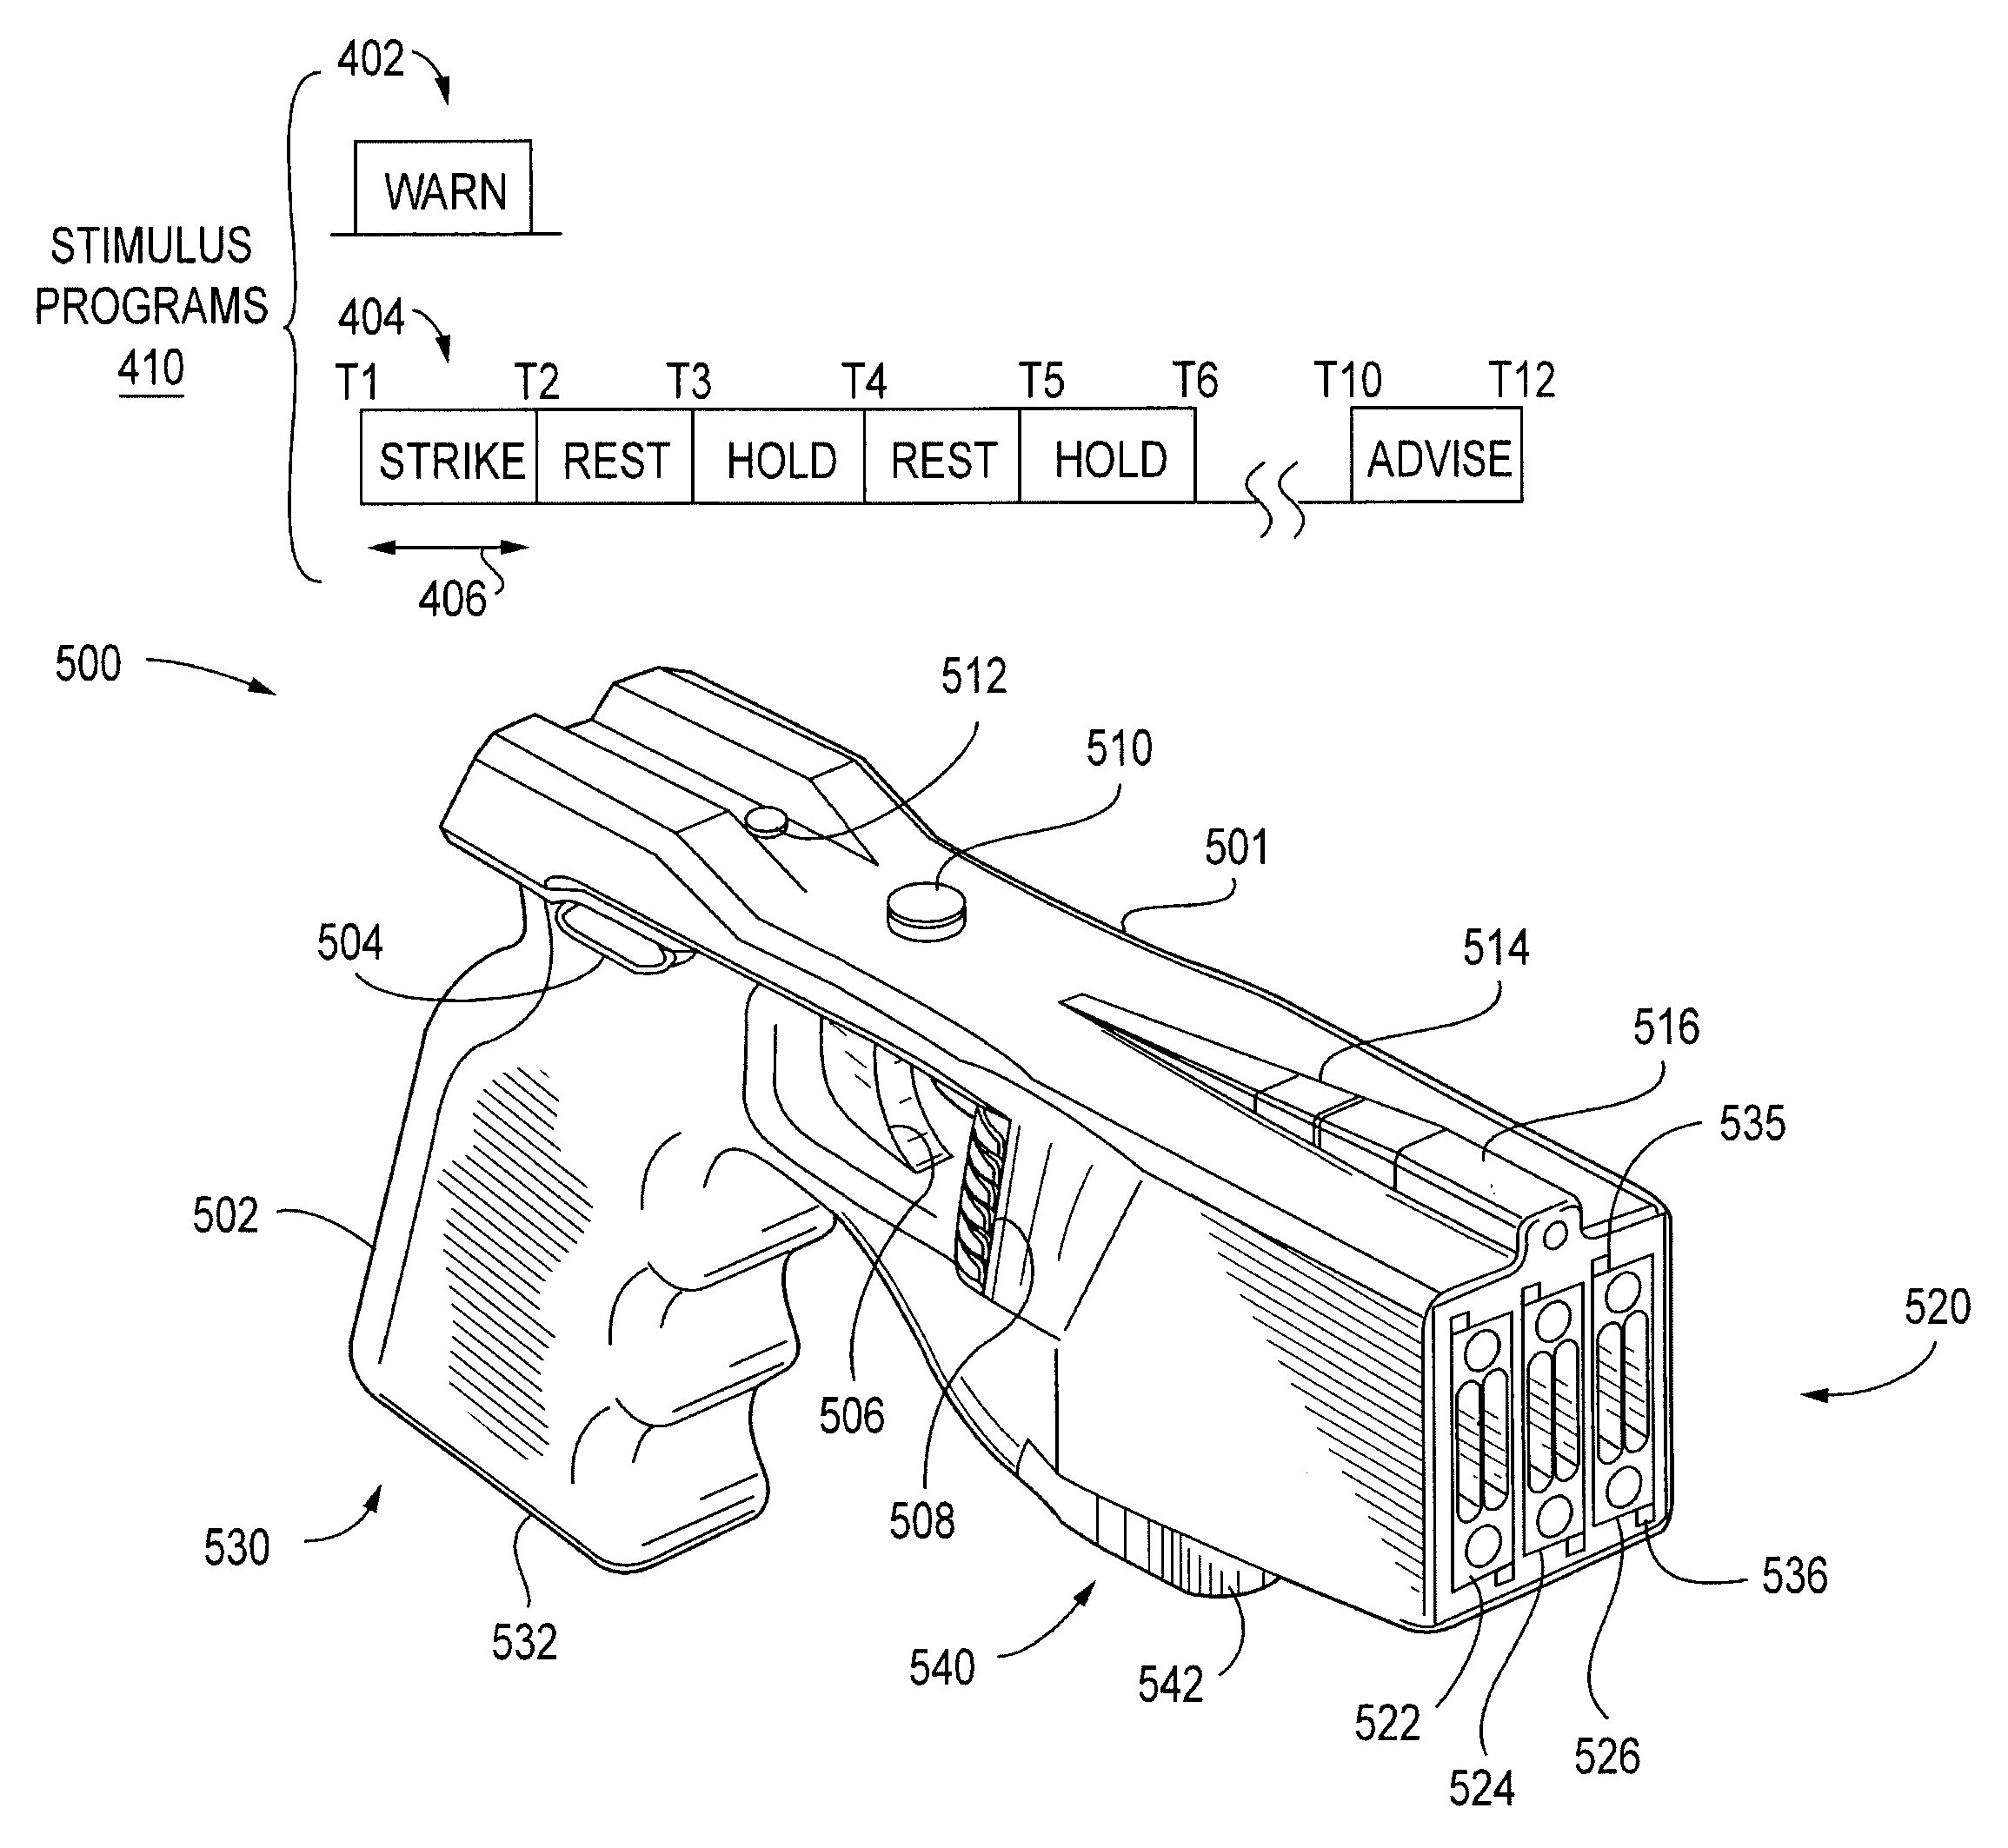 Systems and Methods for Collecting use of Force Information